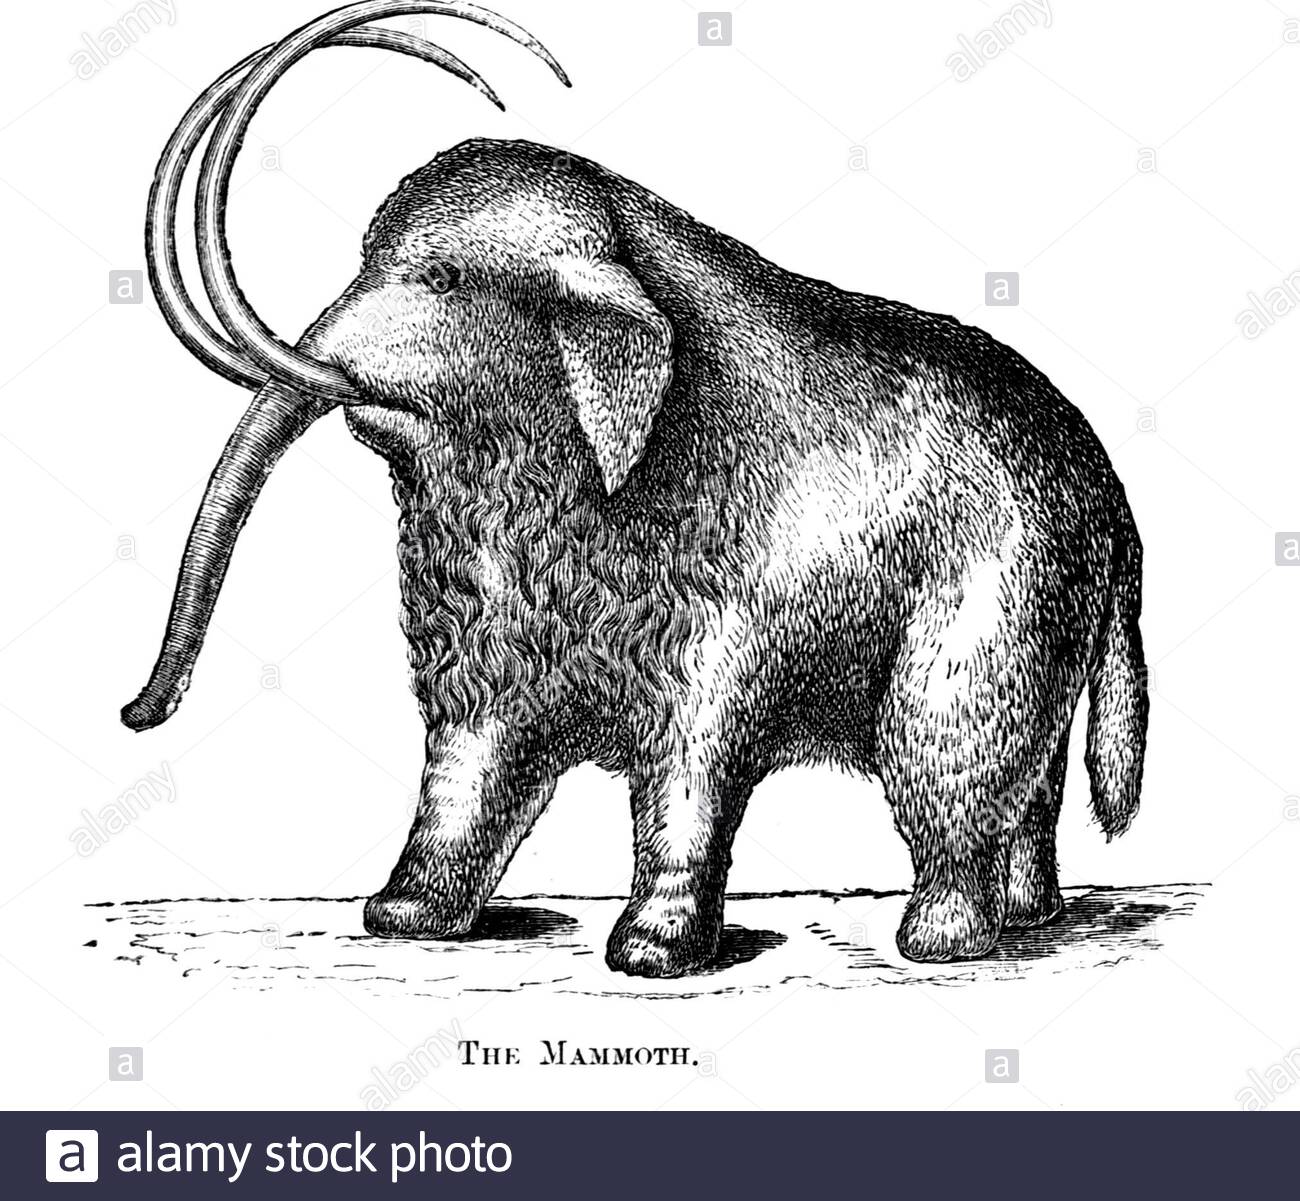 Mammoth, vintage illustration from 1886 Stock Photo